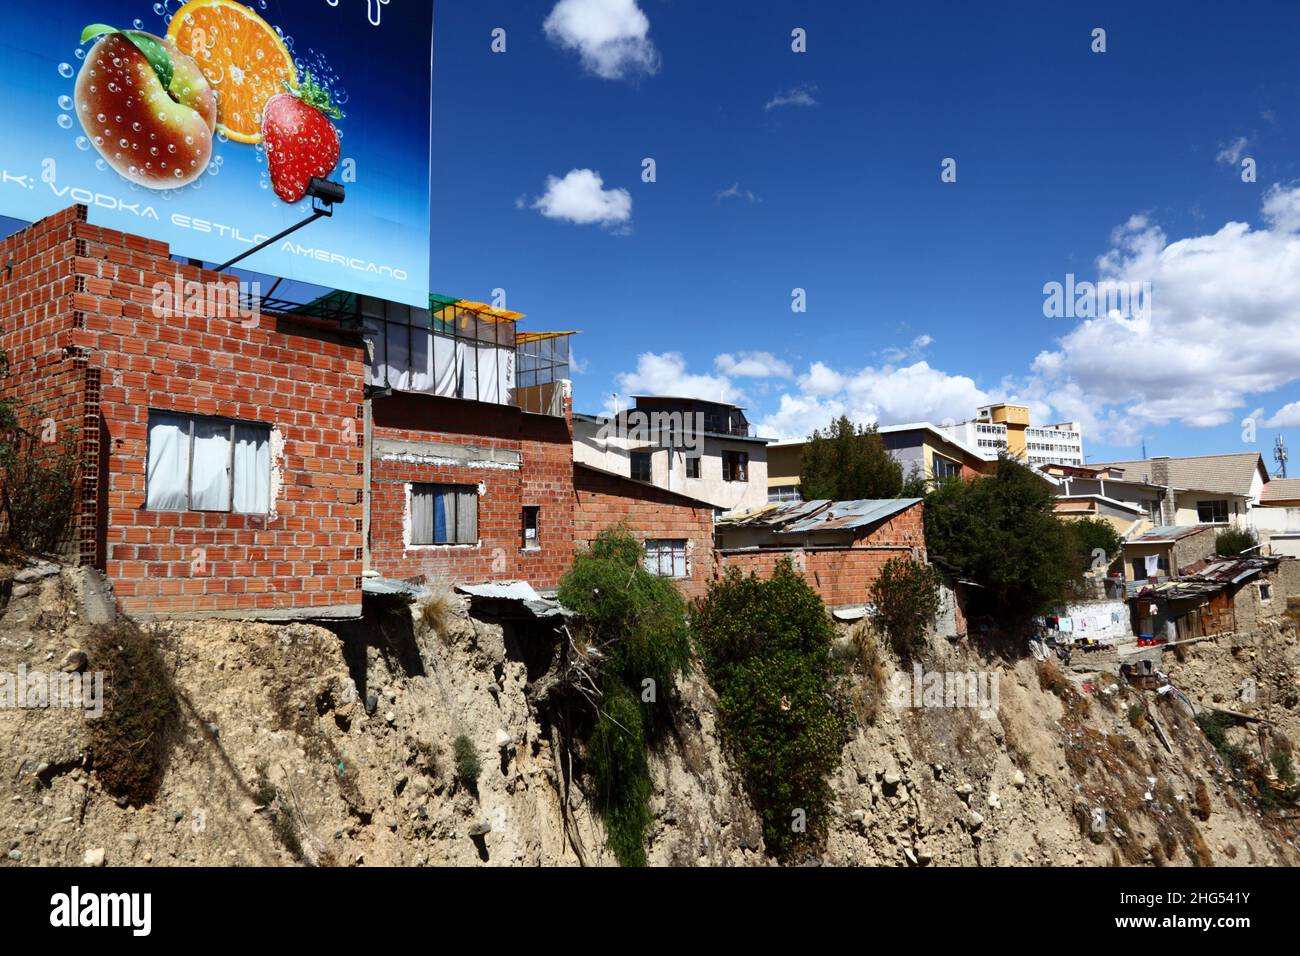 Brick houses on the edge of an unstable earth cliff / ravine overlooking Av del Poeta in Miraflores district, La Paz, Bolivia. Many of La Paz's hillside neighbourhoods have been built in unstable areas and without proper permits or building controls. Subsidence and landslides causing houses to collapse are common, especially in the rainy season. Stock Photo